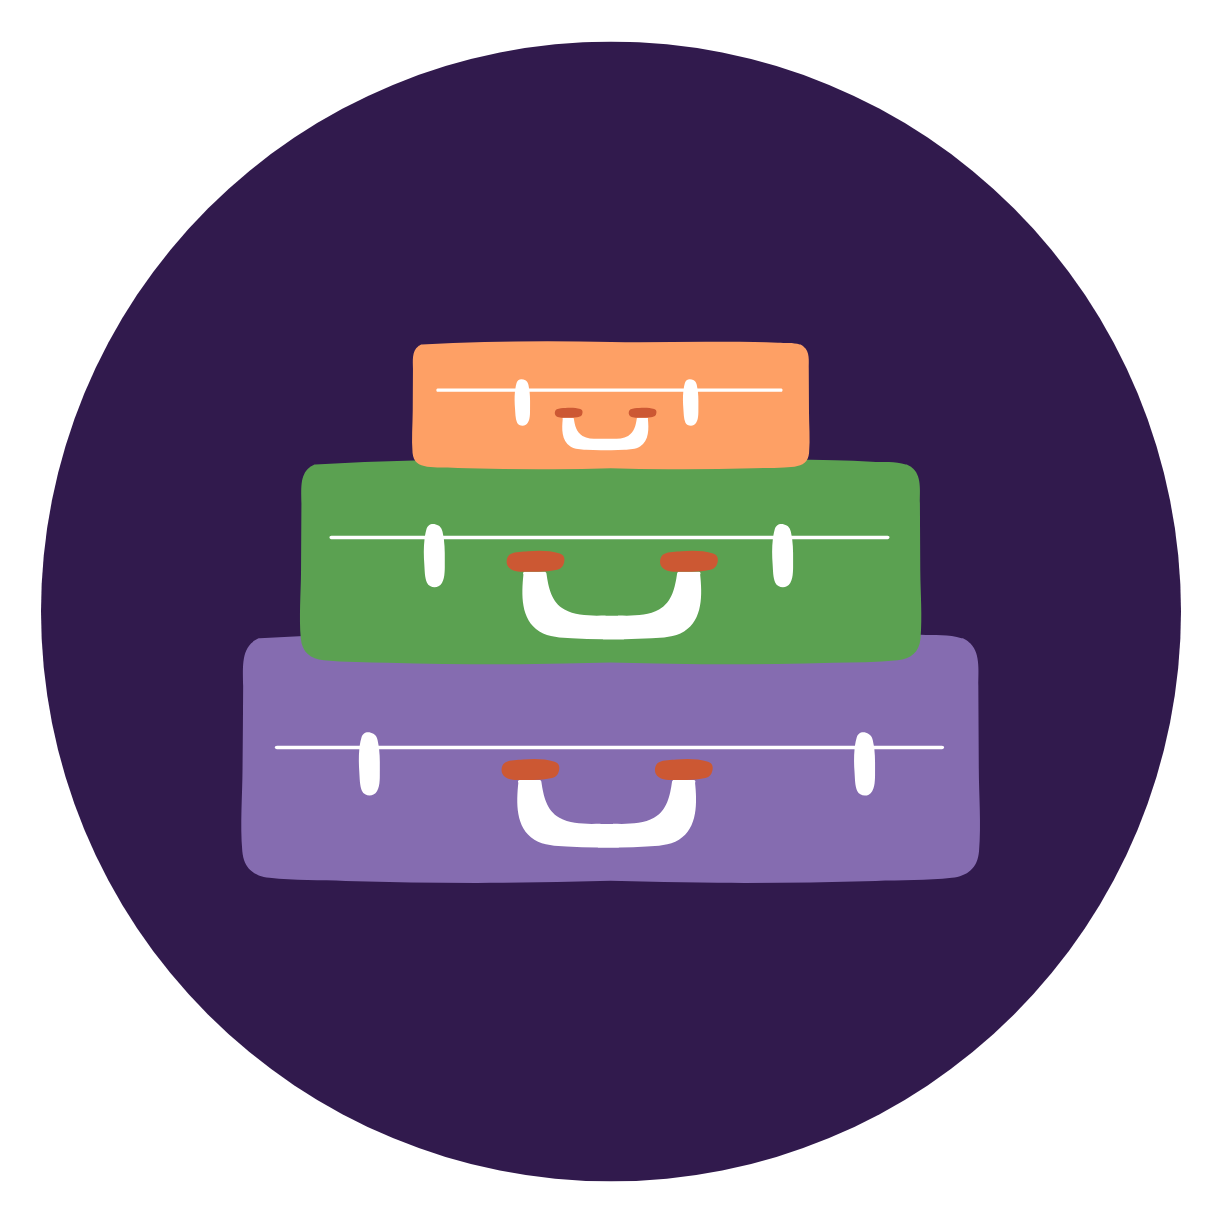 An icon with three suitcases in a purple circle